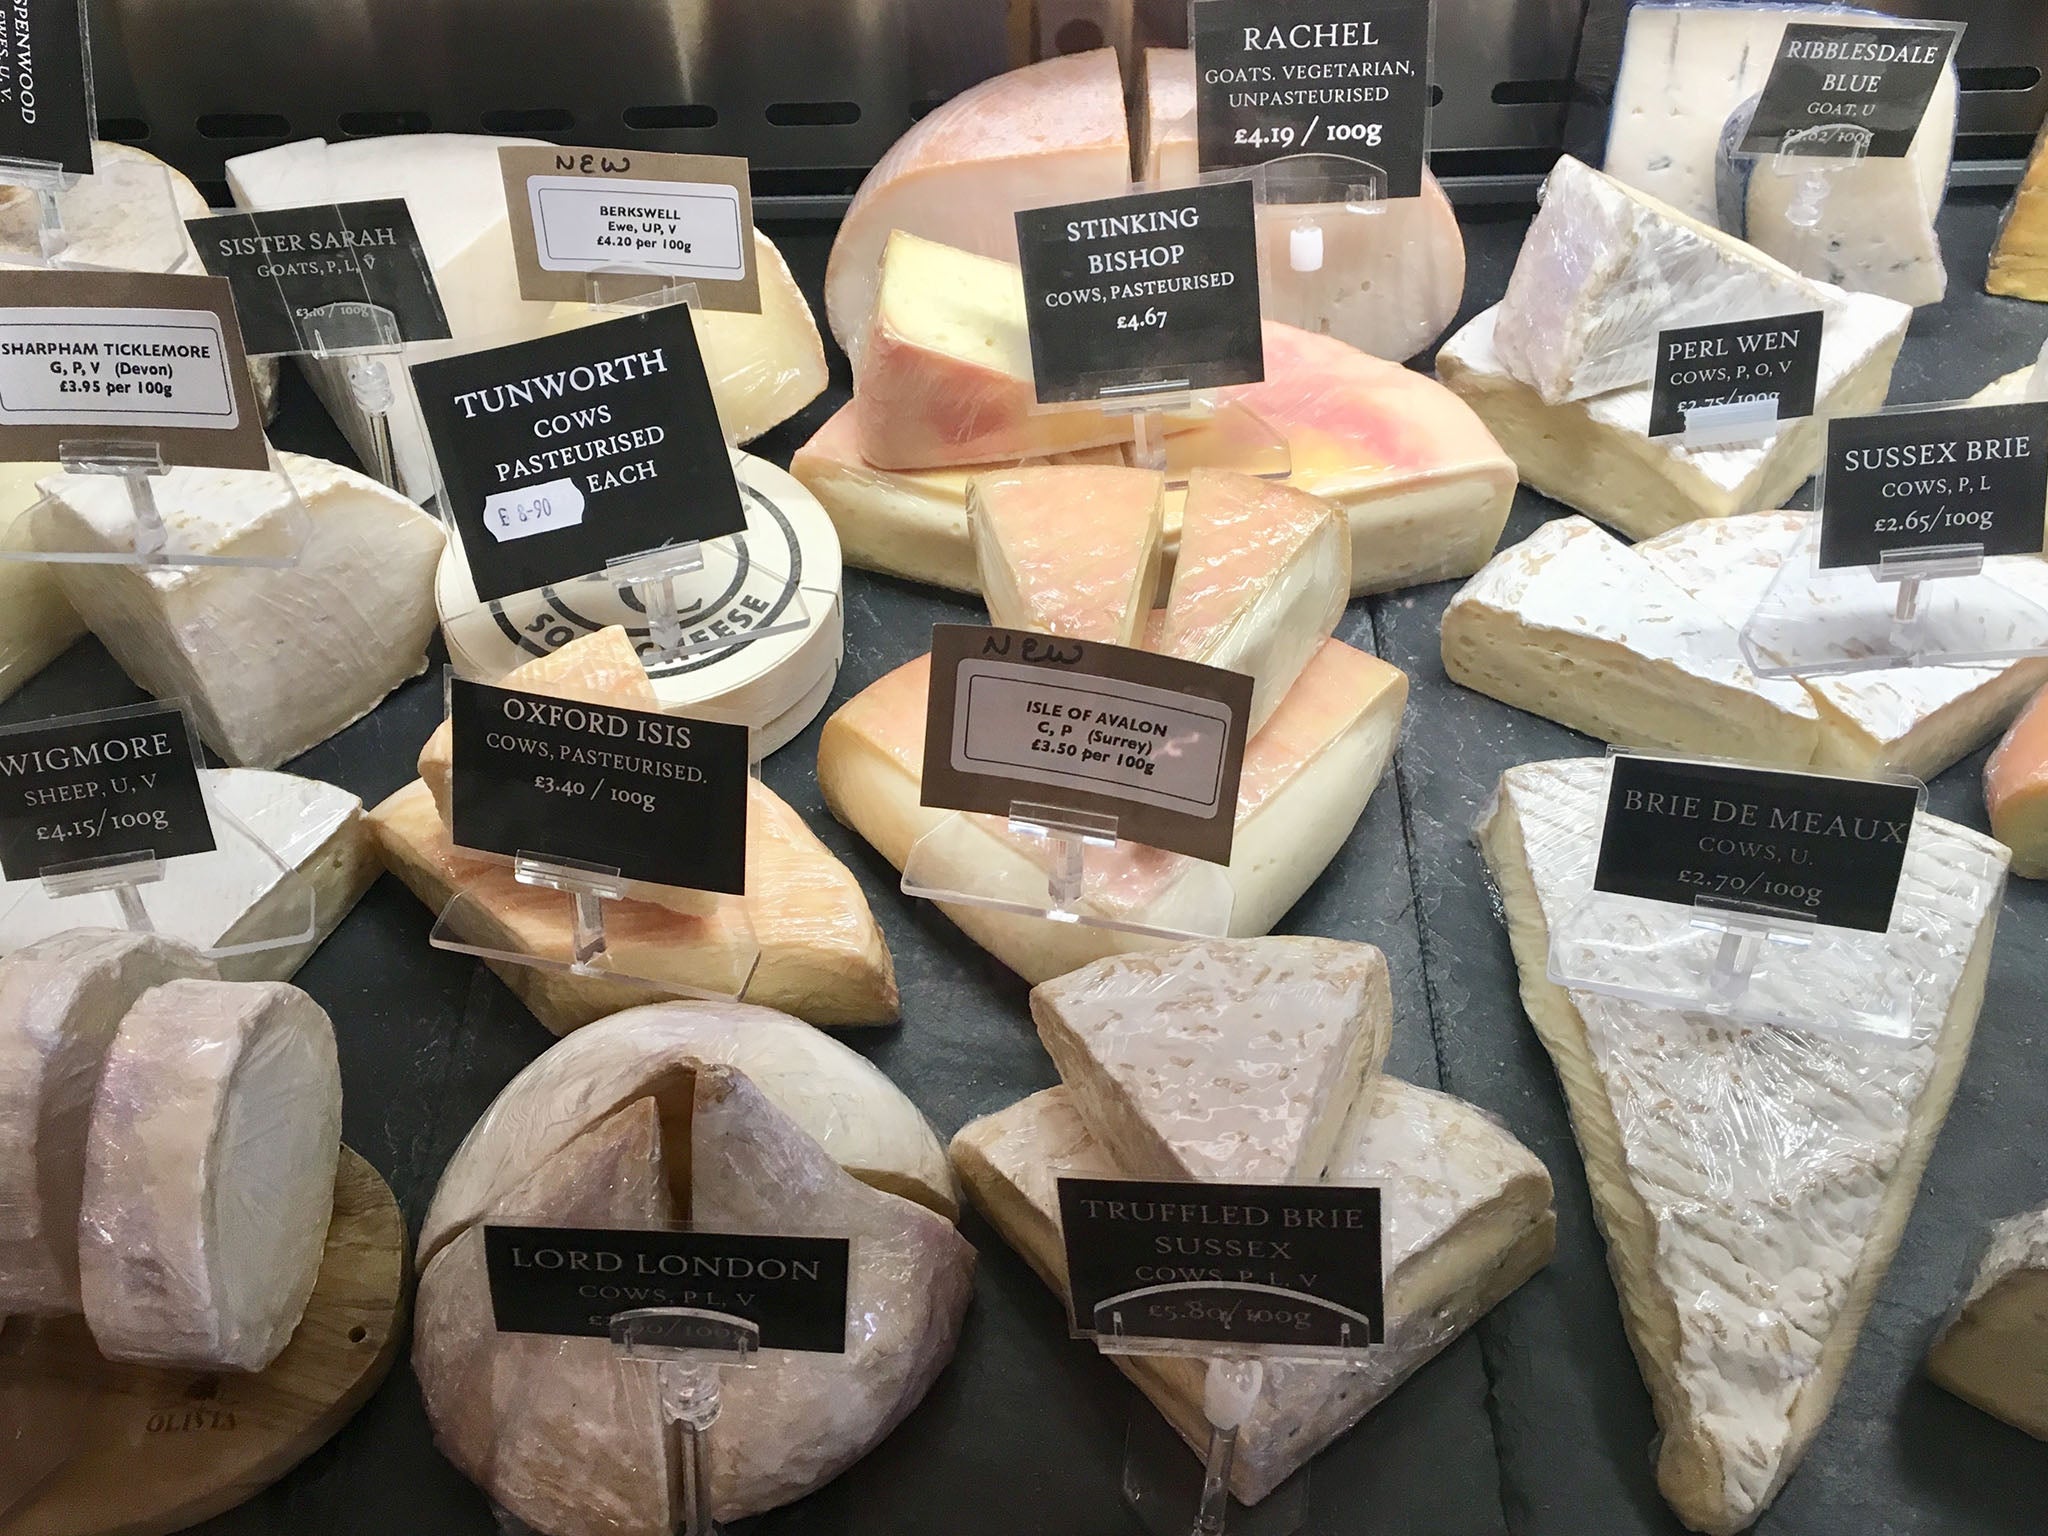 The Penbuckles deli offers 50 cheeses